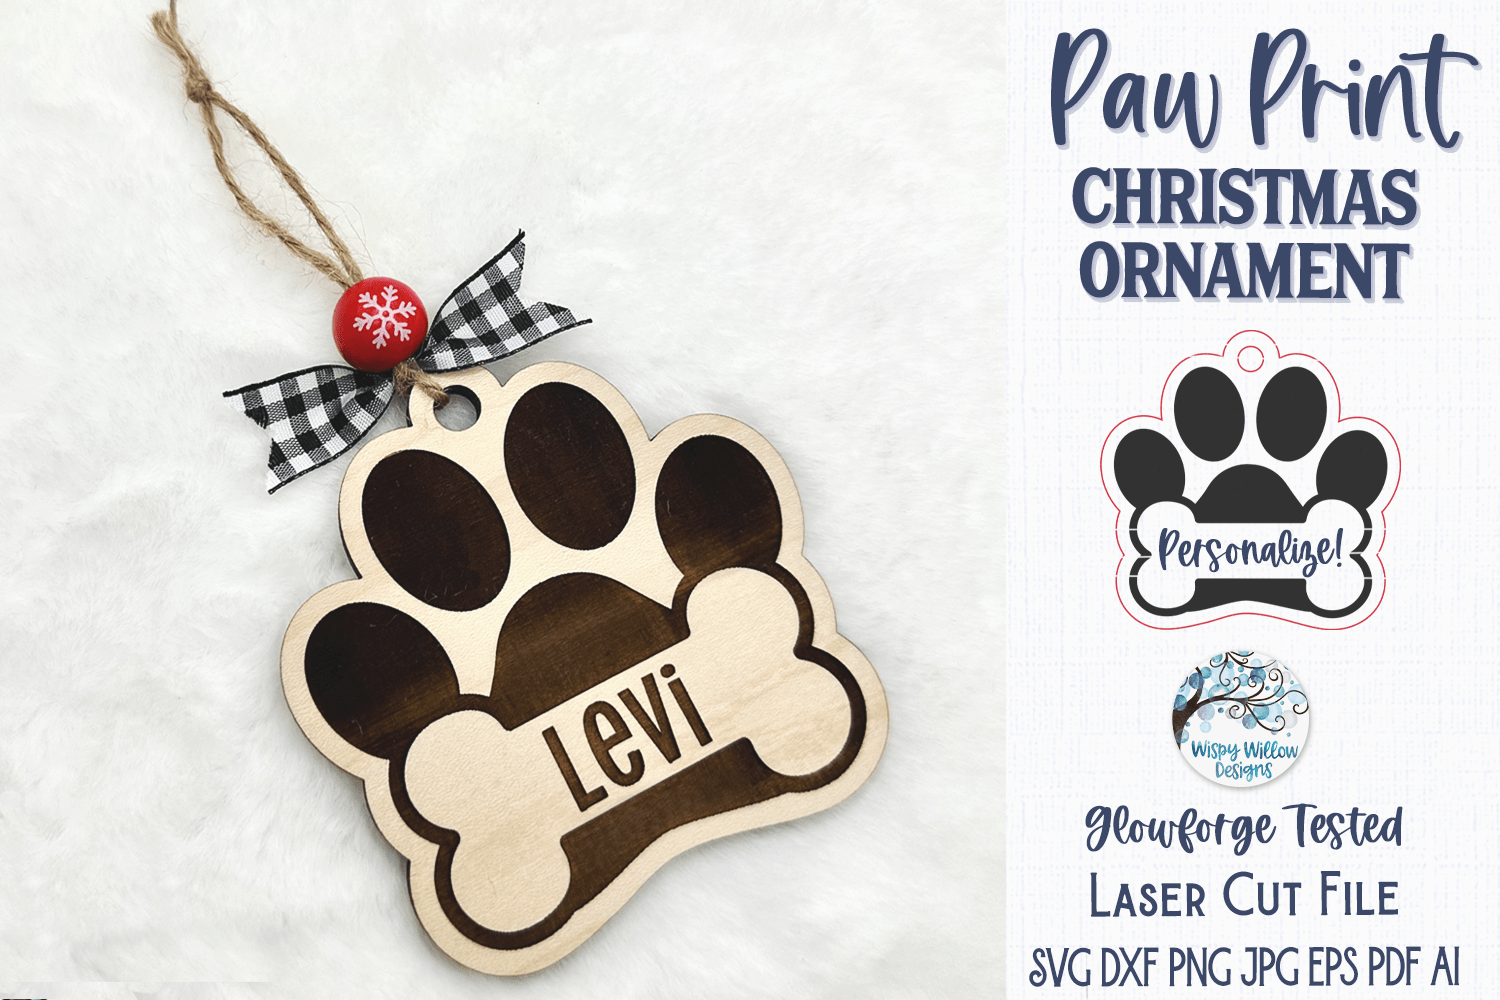 Personalized Paw Print Christmas Ornament for Glowforge or Laser Cutter Wispy Willow Designs Company